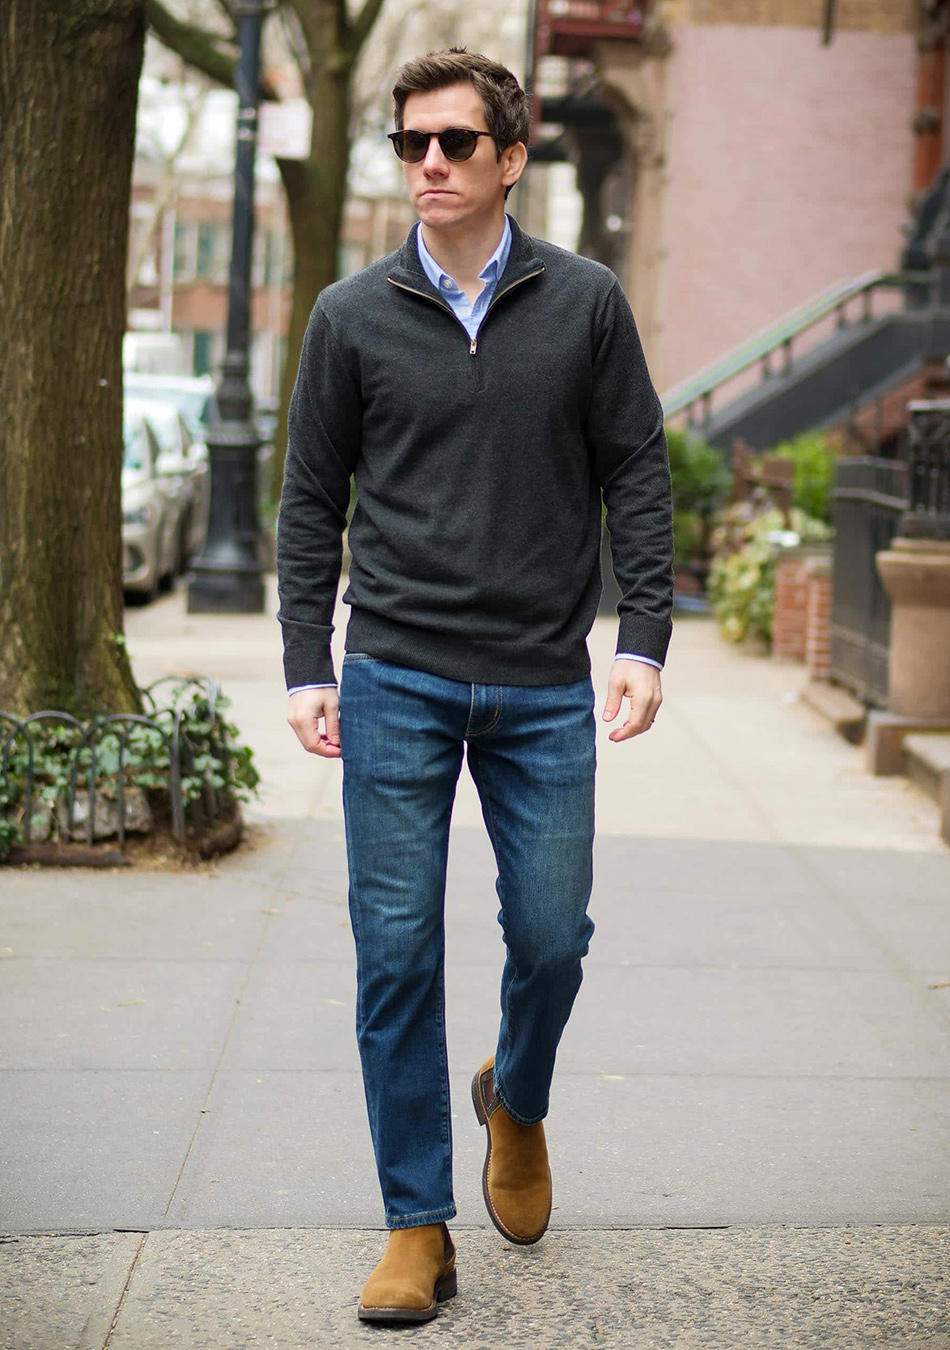 Grey sweater, blue shirt, blue jeans, and brown suede Chelsea boots